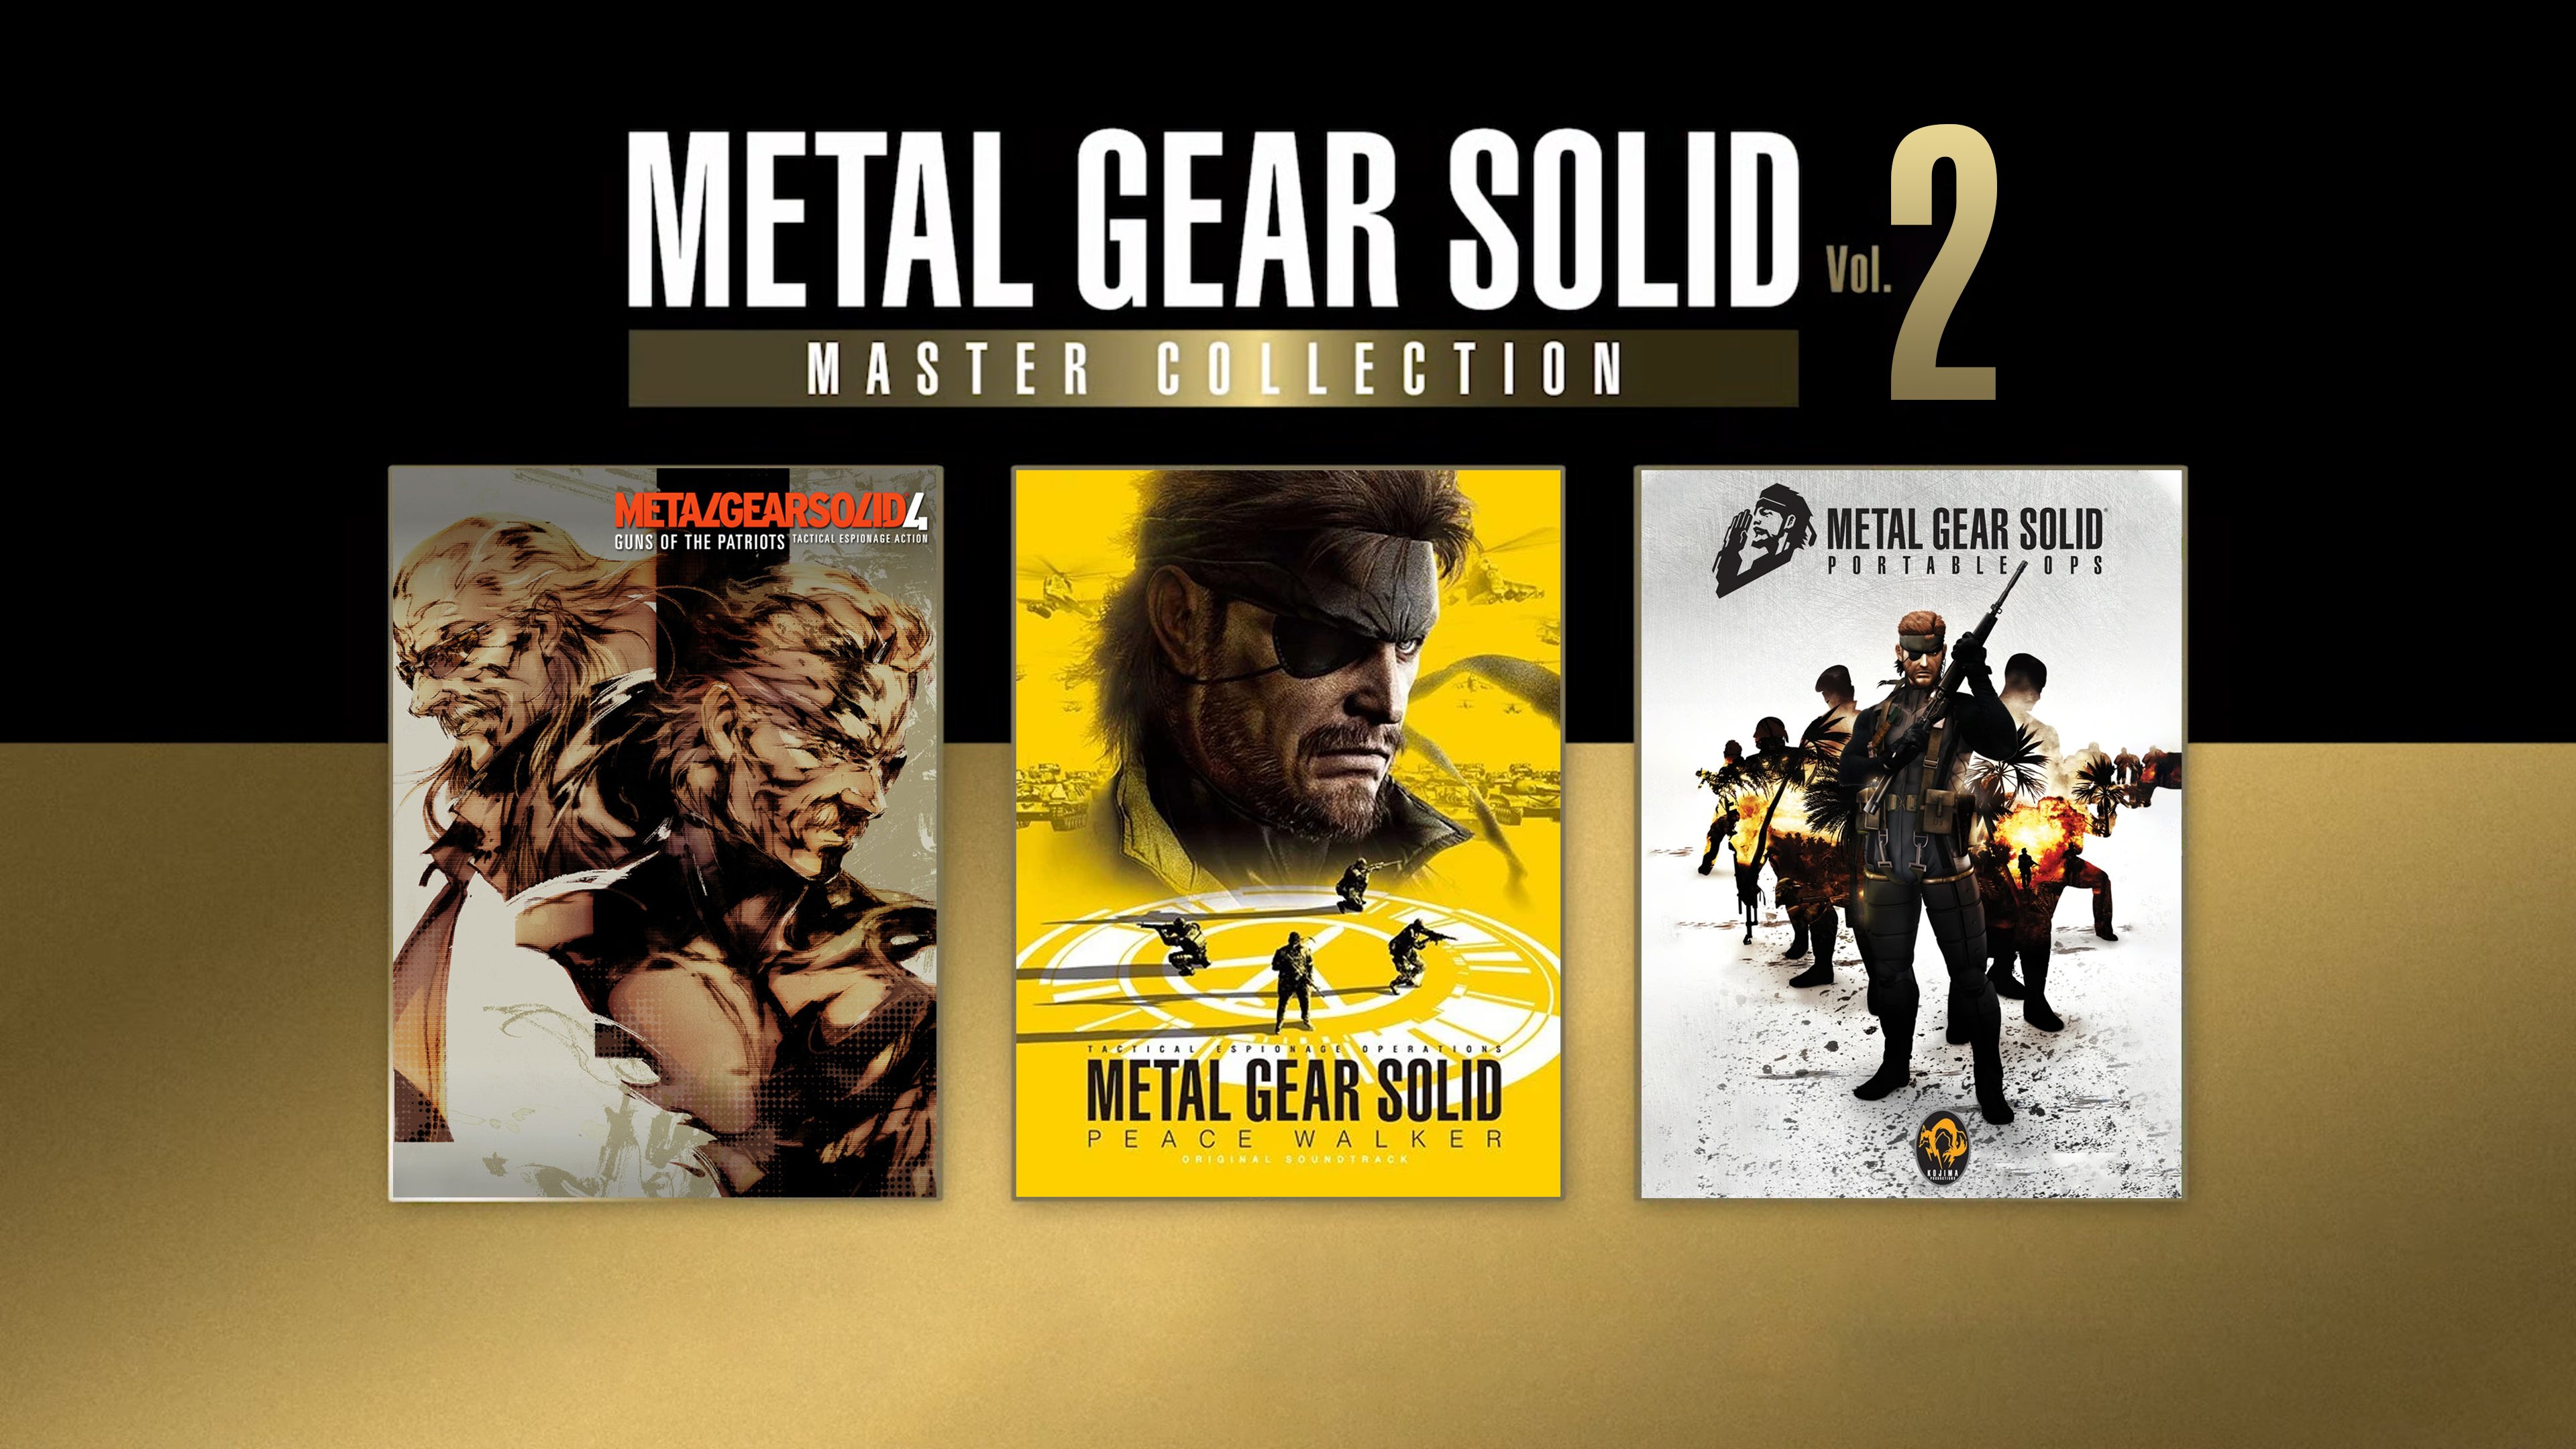 Metal Gear Solid Master Collection Vol. 2